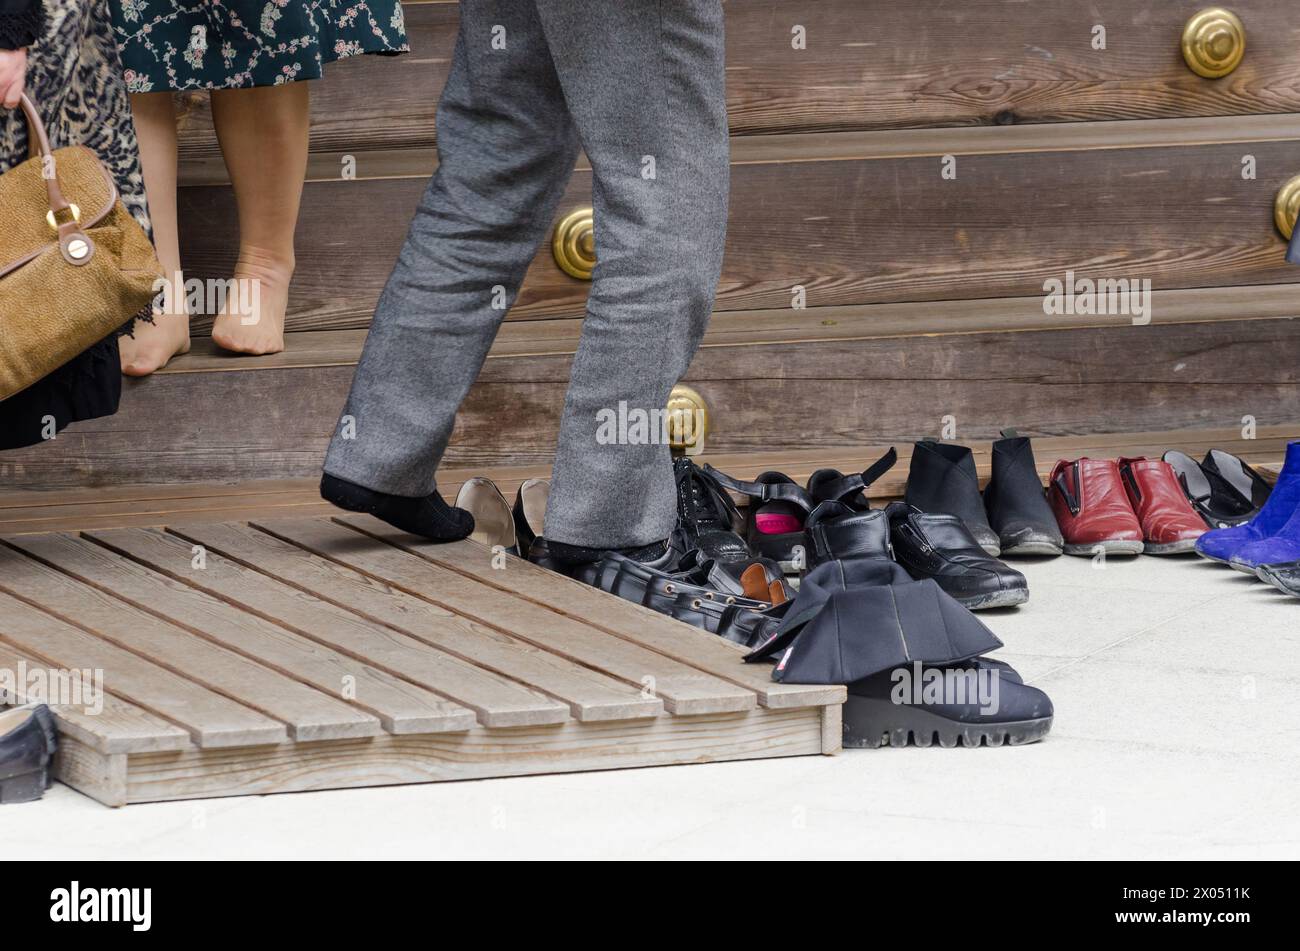 A row of shoes are lined up on a wooden platform. The shoes are of various colors and styles, including black, brown, and white. Concept of organizati Stock Photo